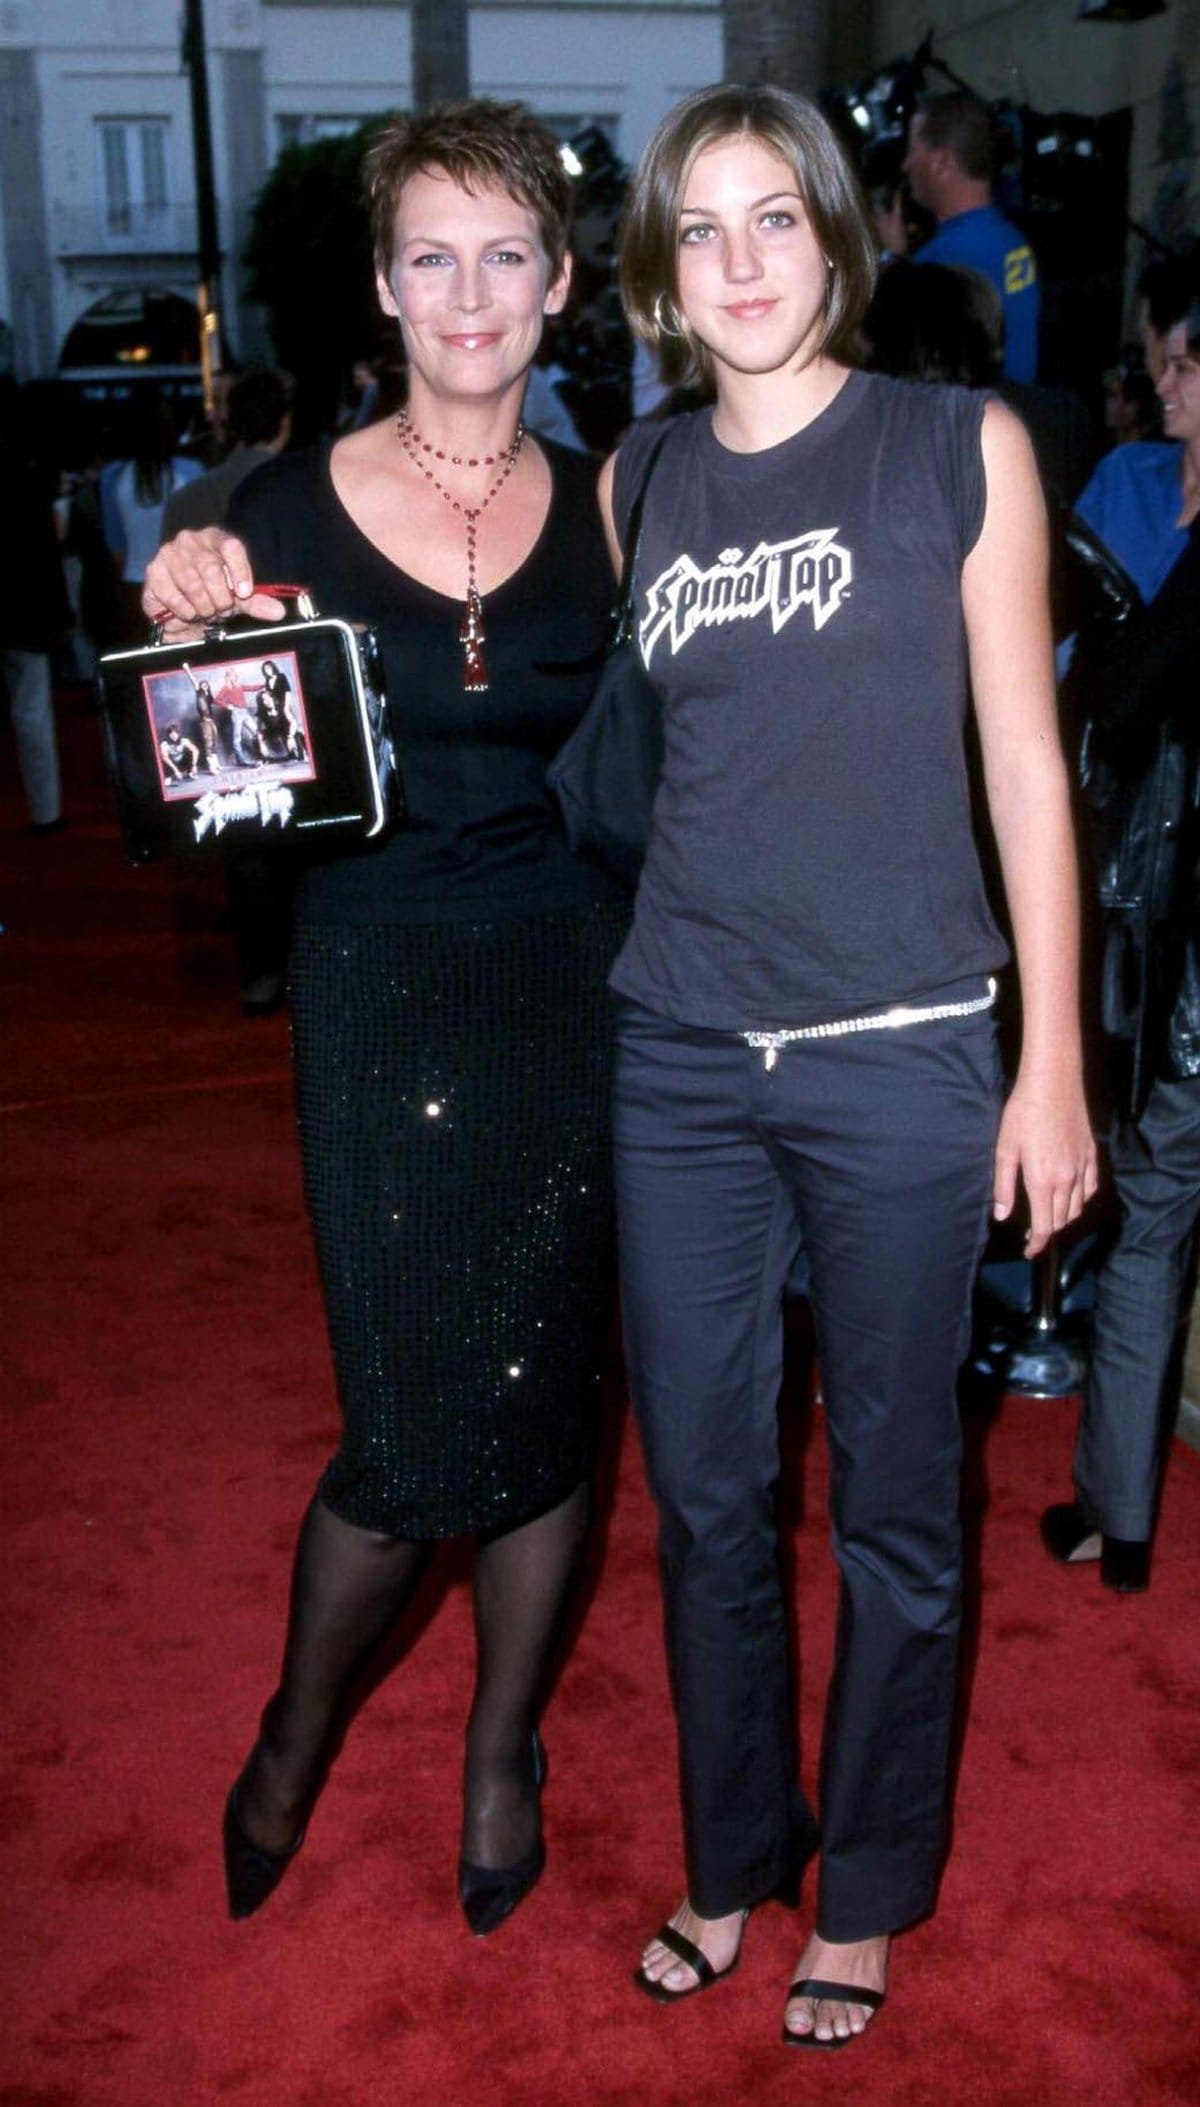 Actress Jamie Lee Curtis and her adopted daughter Annie arrive at the premiere of the re-release of "This Is Spinal Tap"